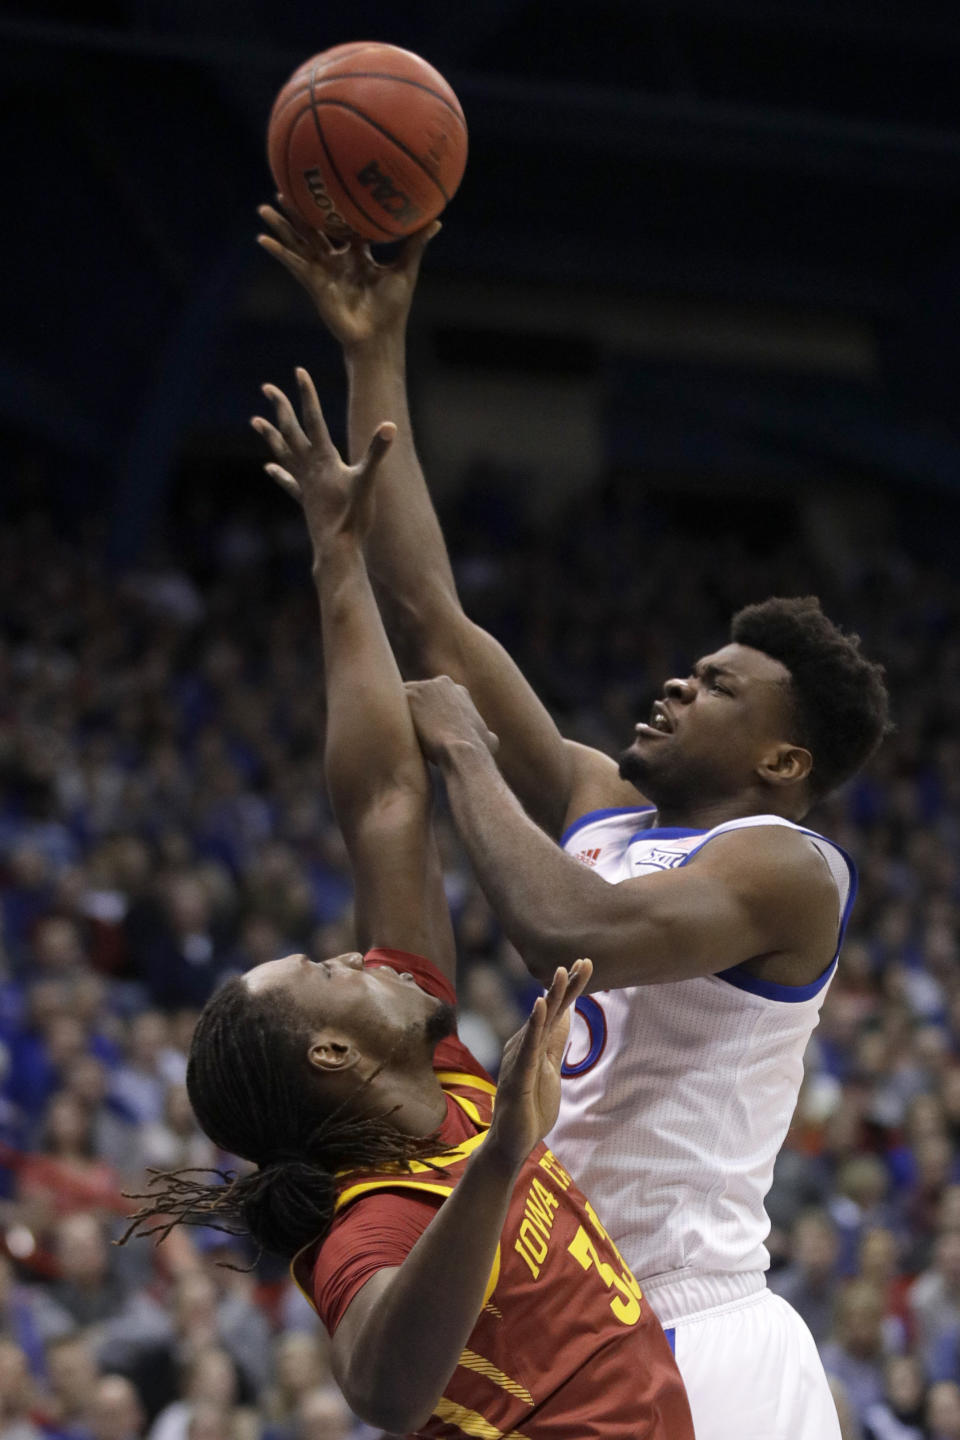 Kansas center Udoka Azubuike (35) shoots over Iowa State forward Solomon Young (33) during the first half of an NCAA college basketball game in Lawrence, Kan., Monday, Feb. 17, 2020. (AP Photo/Orlin Wagner)